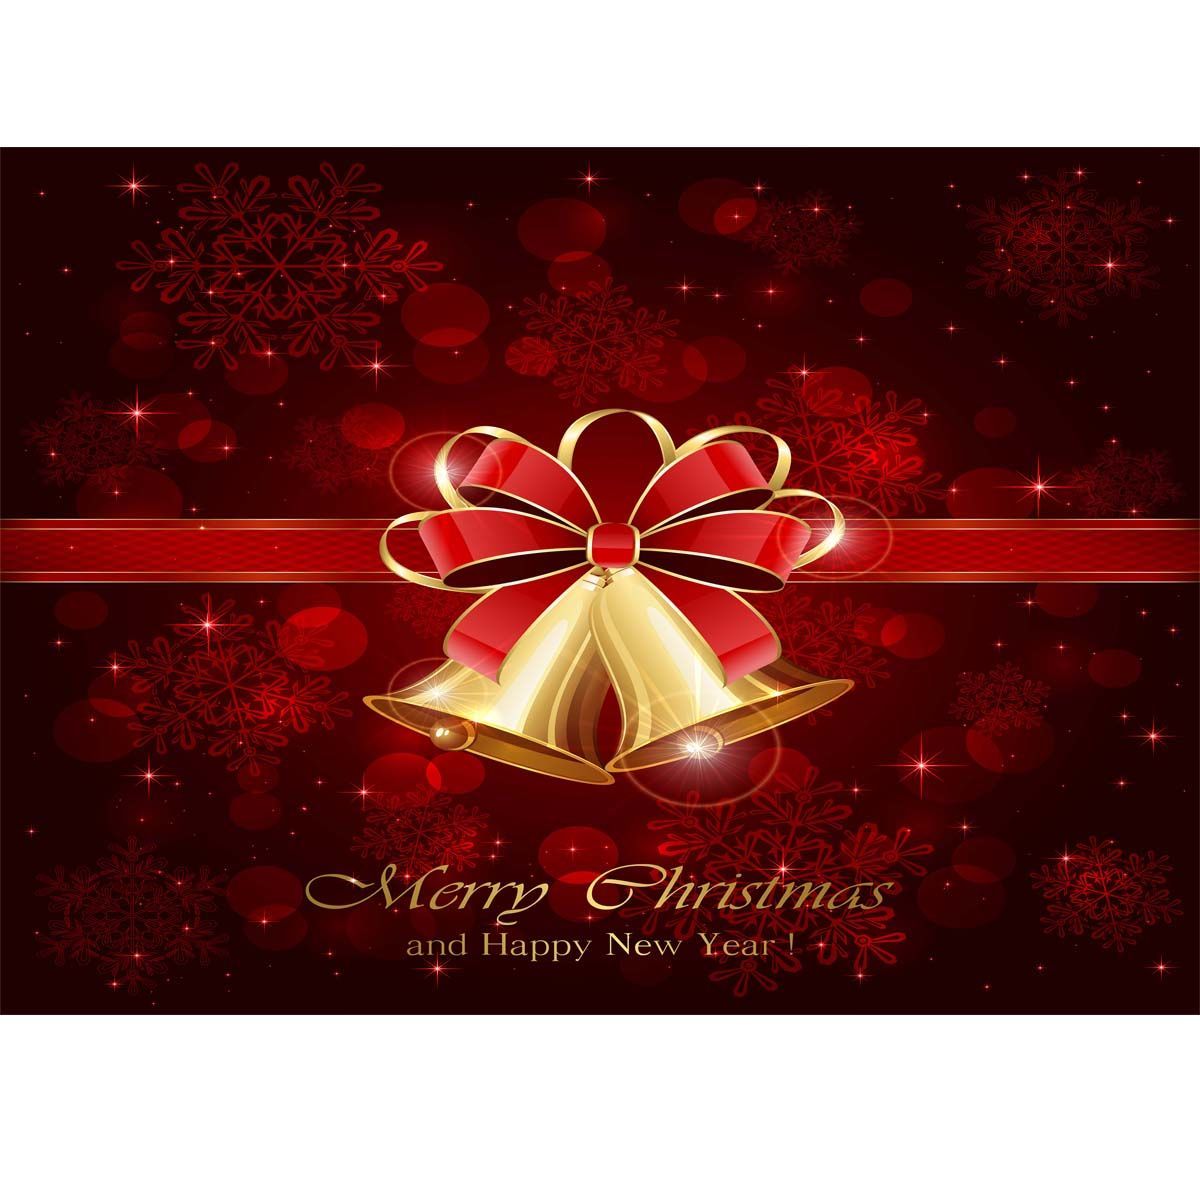 5x7FT-Vinyl-Merry-Christmas-Happy-New-Year-Red-Bell-Ring-Photography-Backdrop-Background-Studio-Prop-1574722